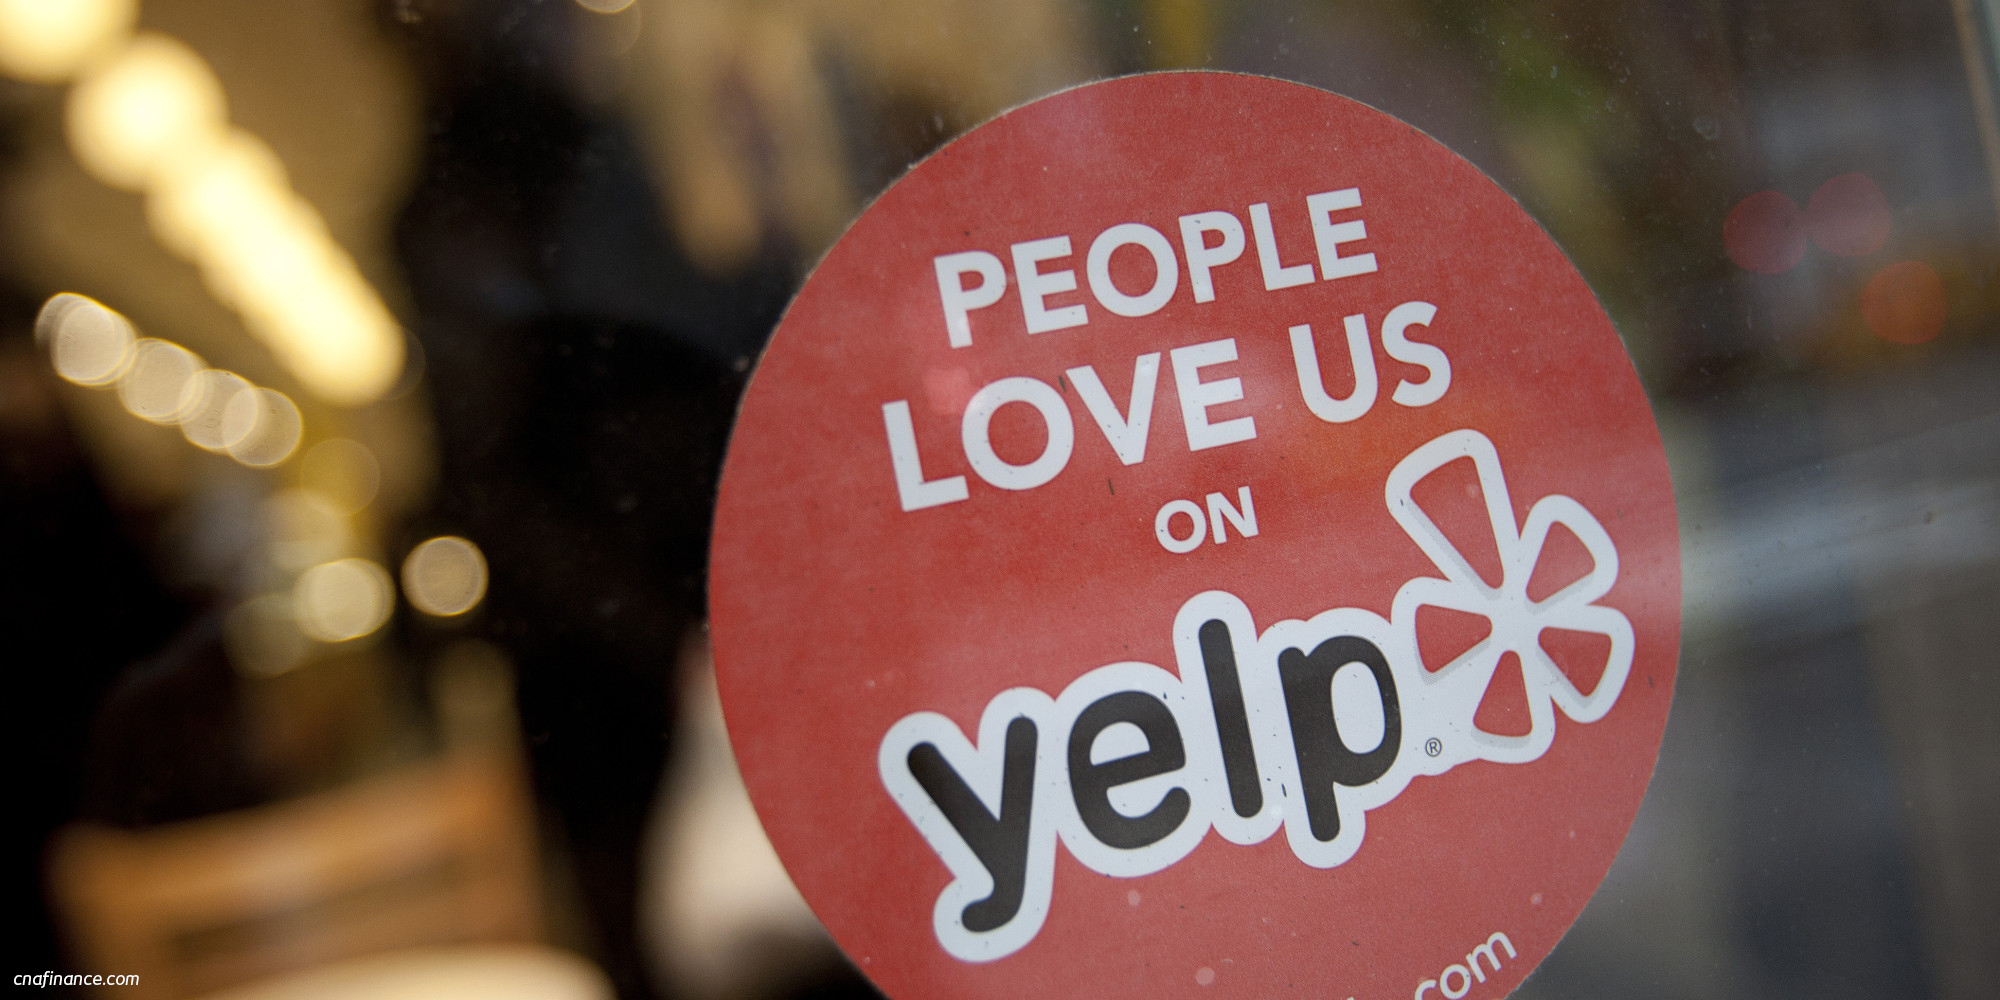 Healthcare providers: Yelp isn’t coming, it’s already here